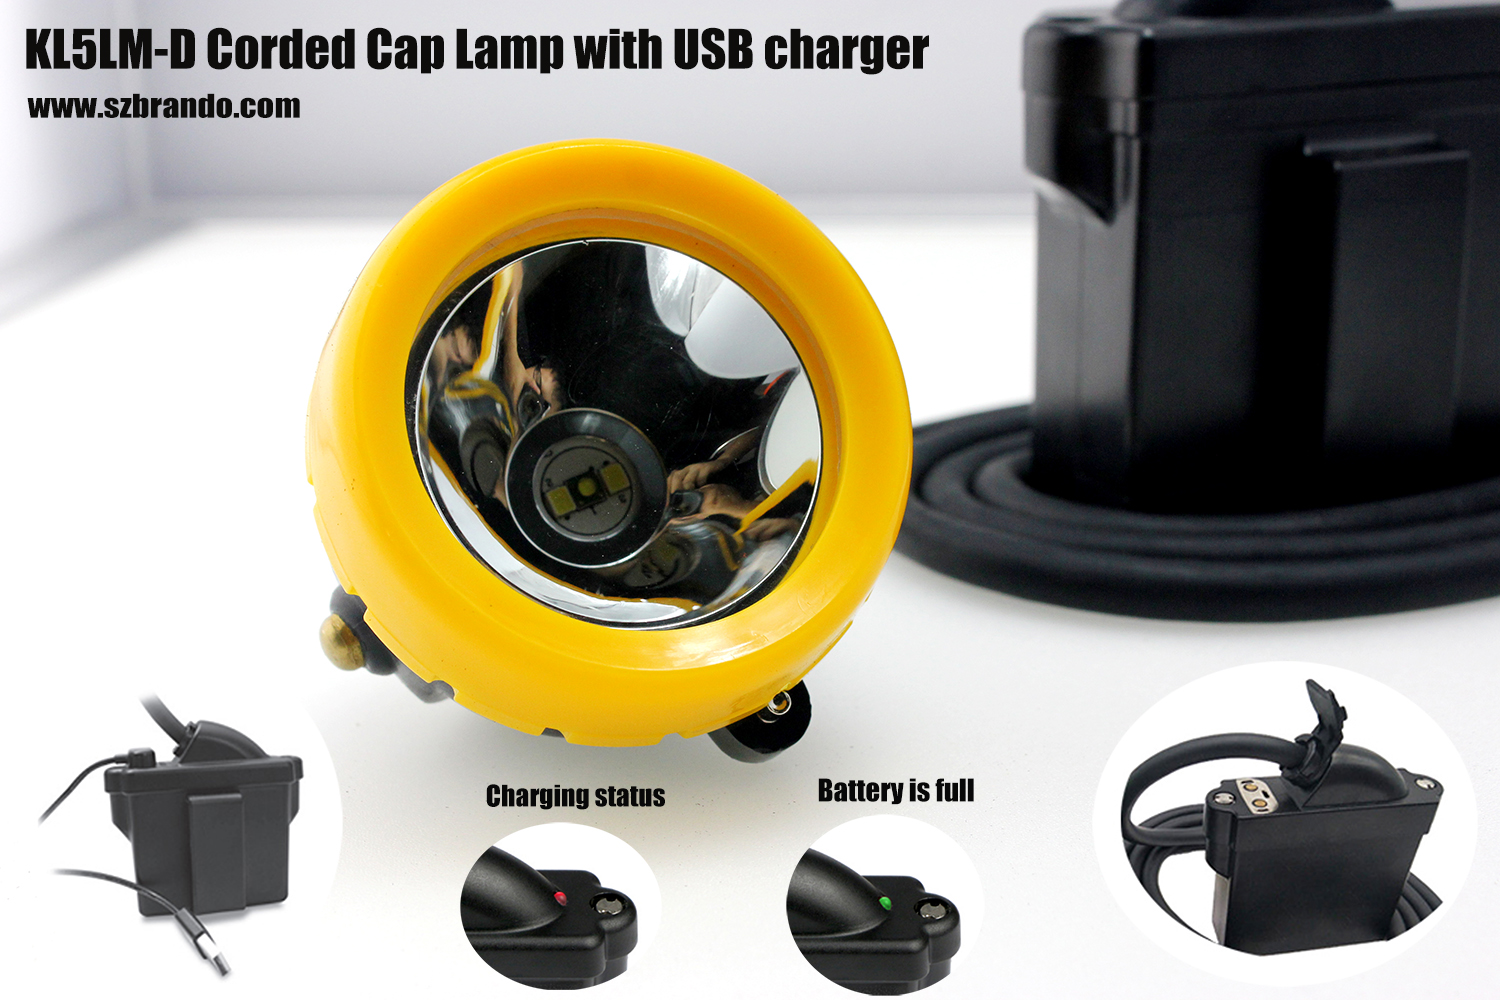 New customized mining lamp with USB cable charger